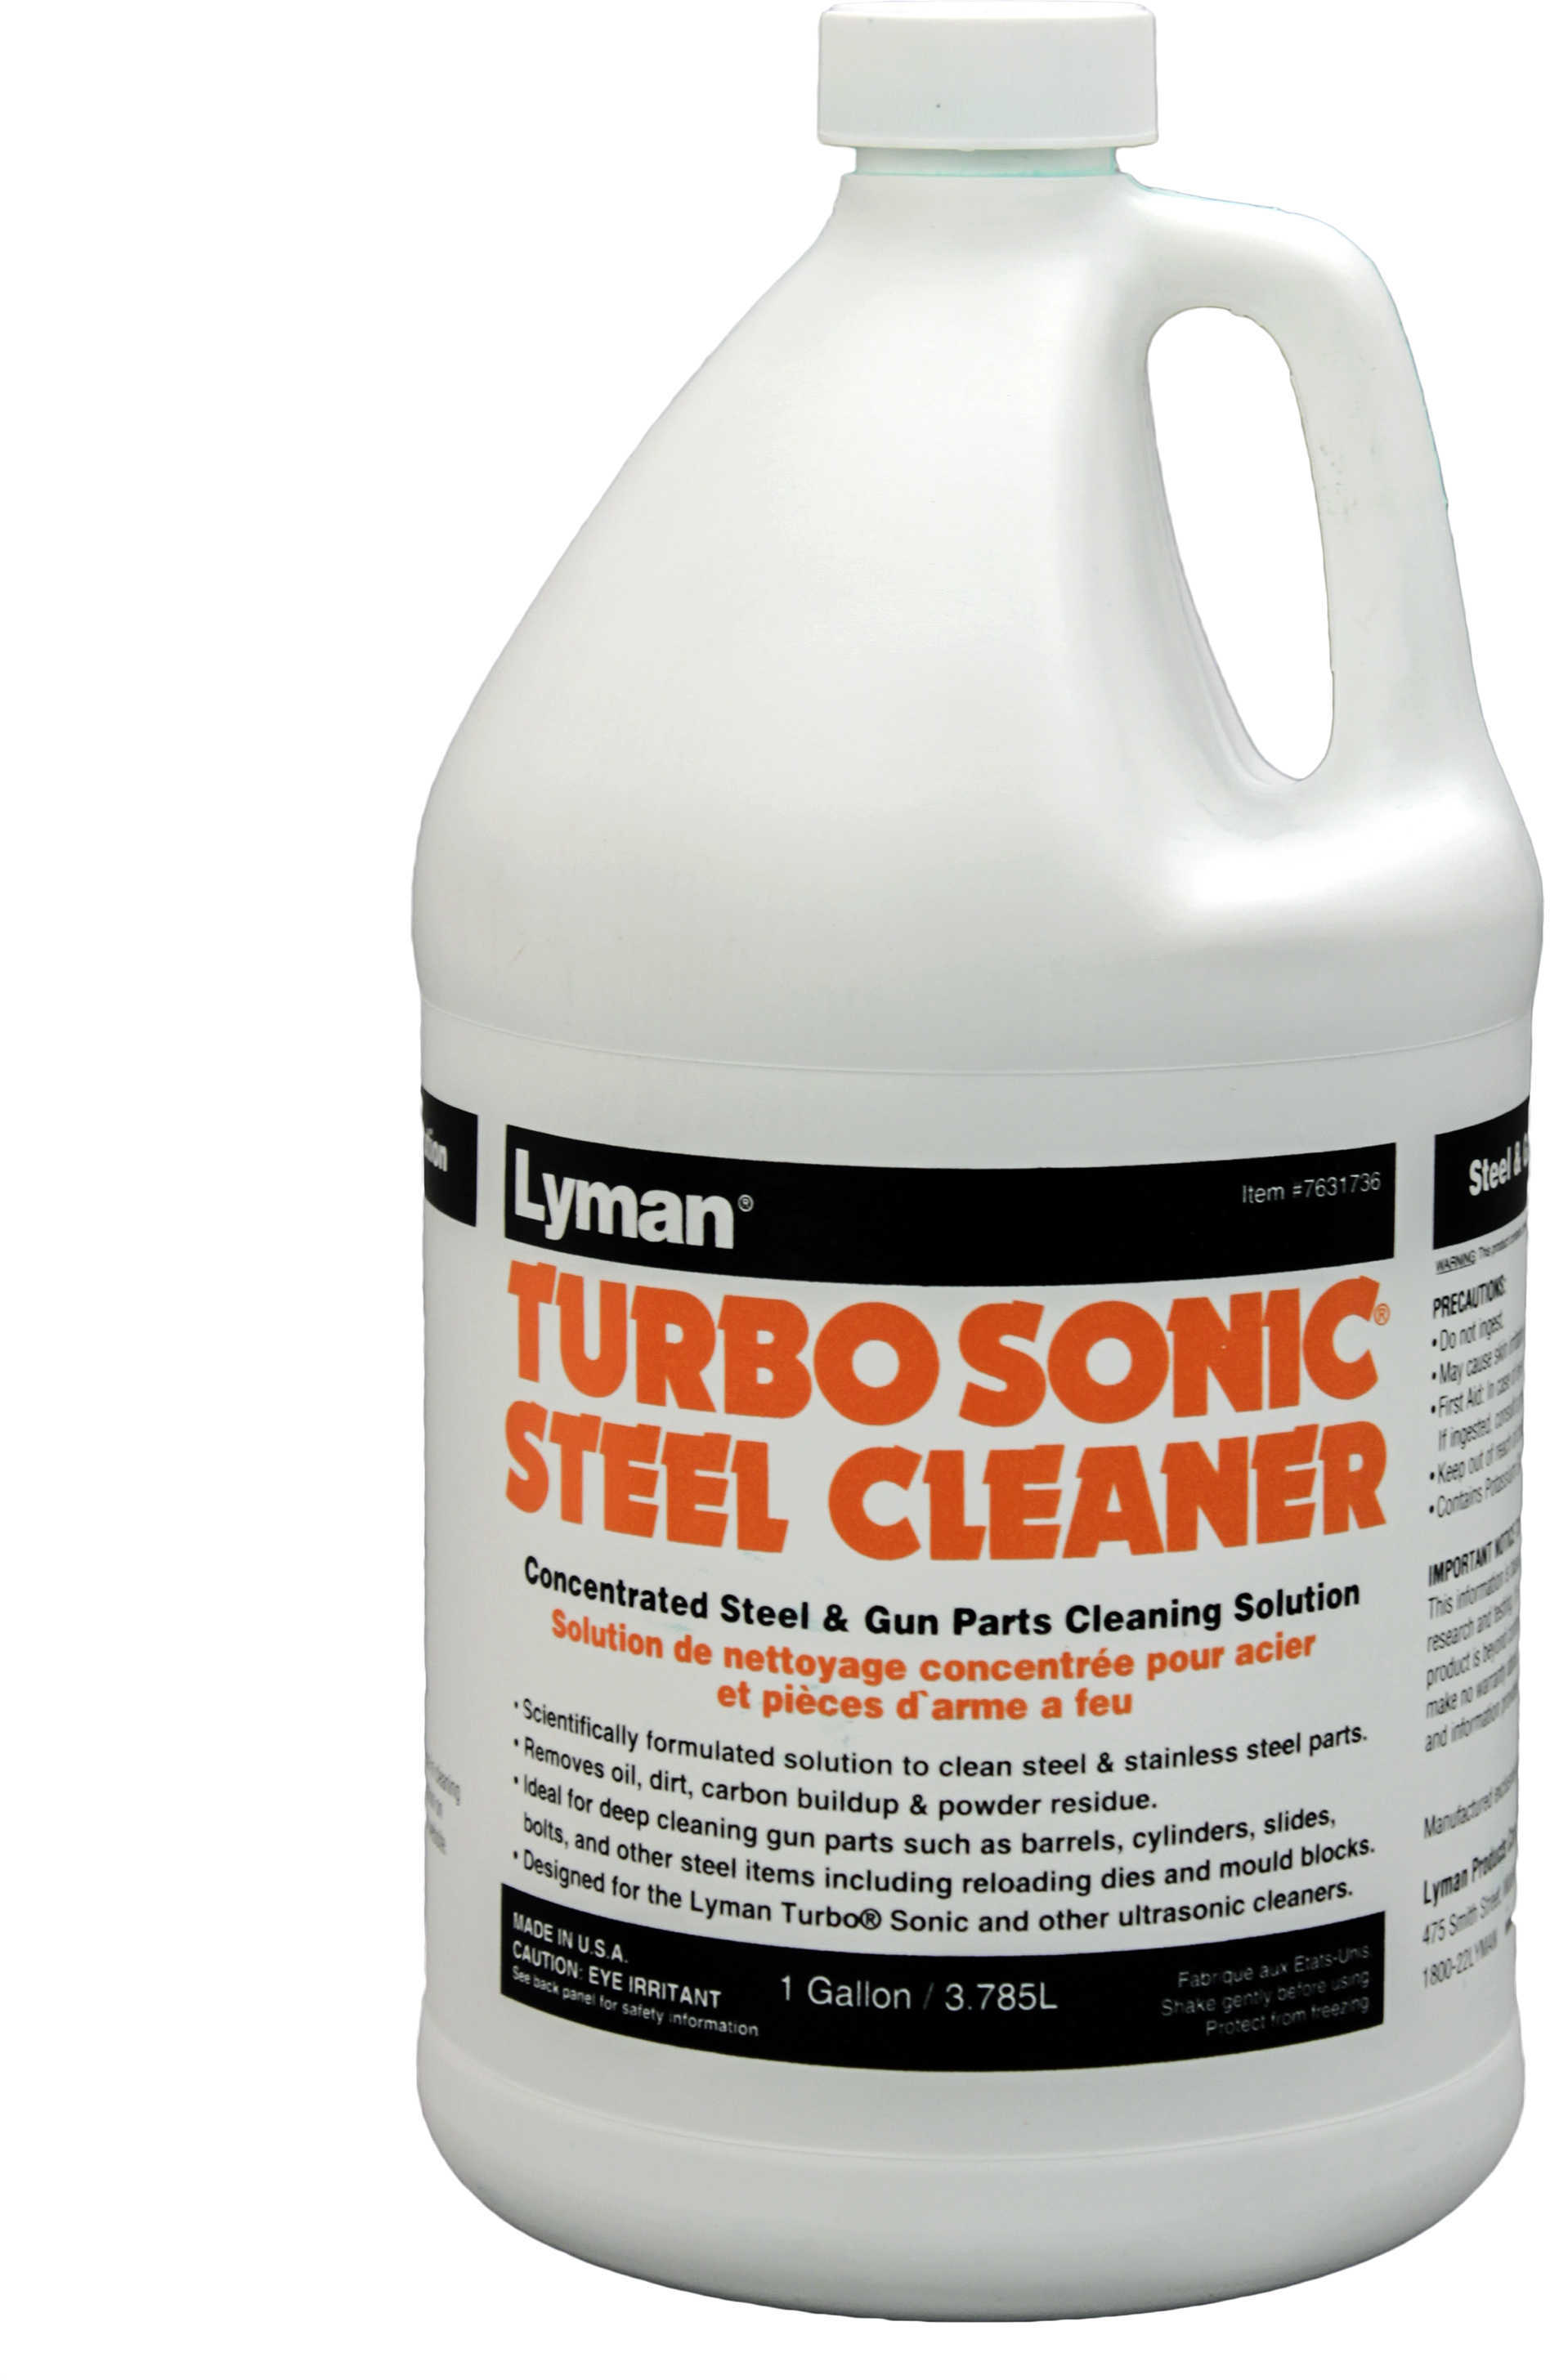 Lyman TurboSonic Gun Parts Cleaning Concentrate (1 Gal) 7631736